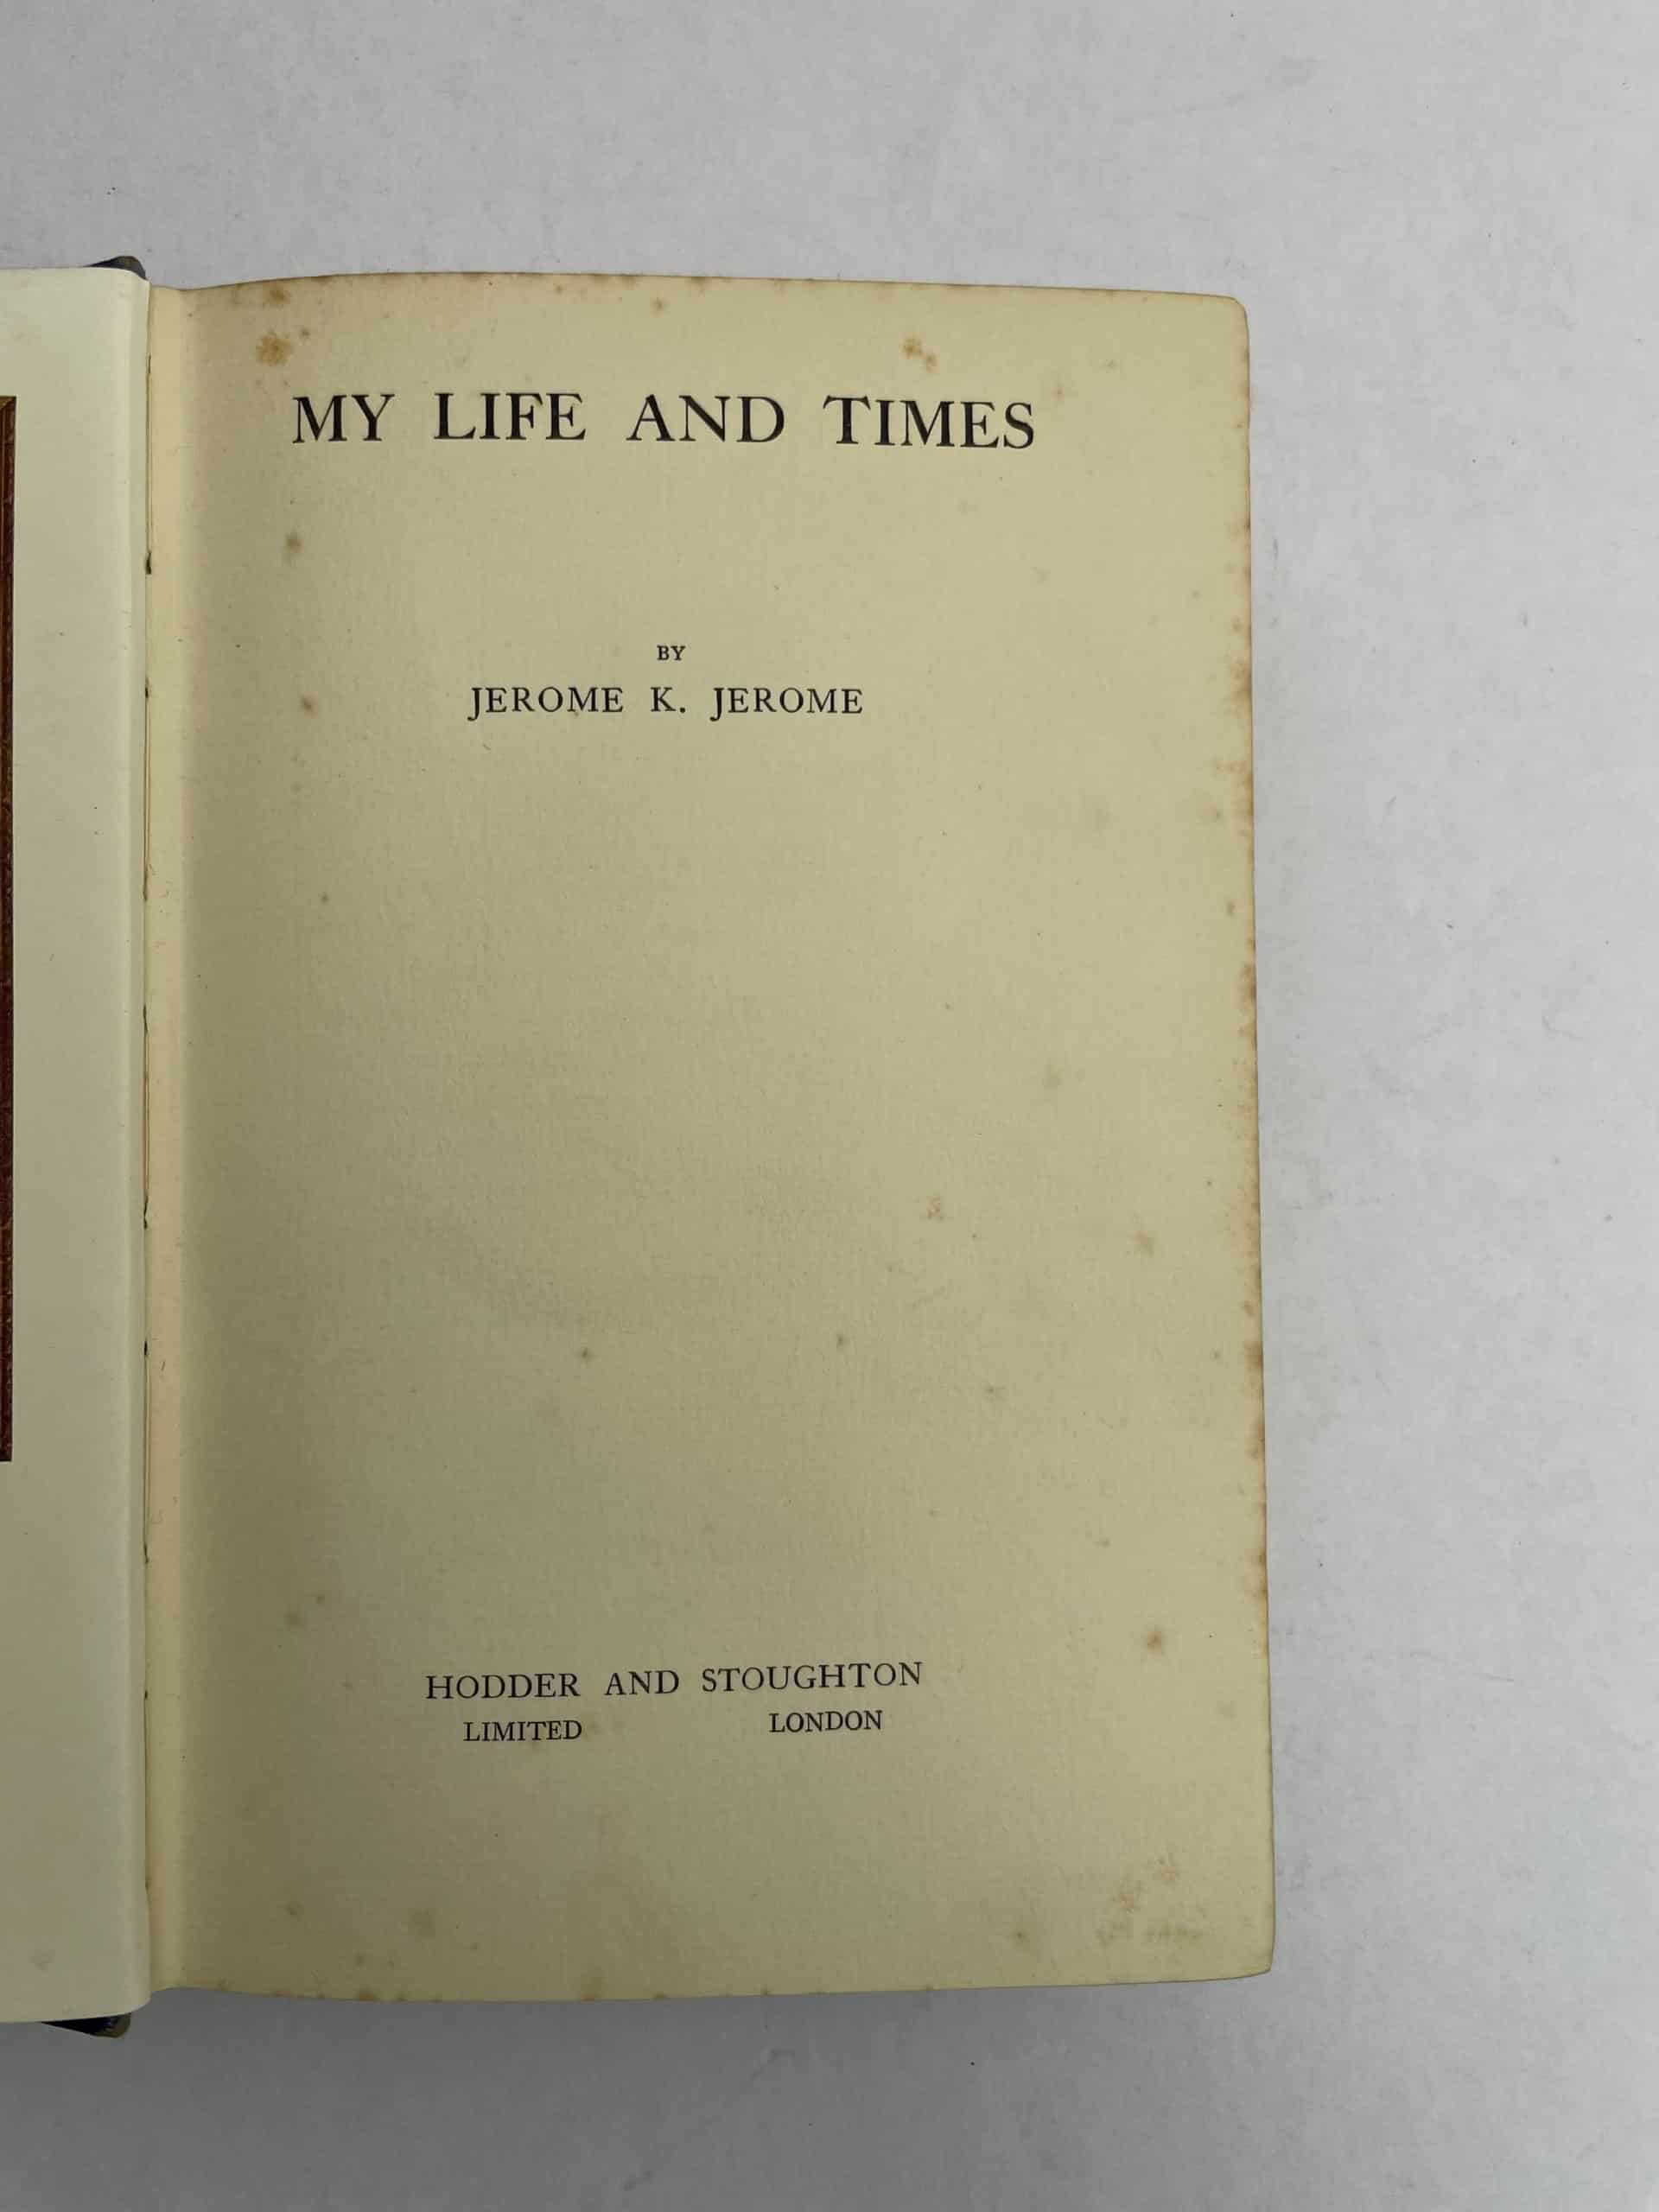 jerome k jerome my life and times first edition2